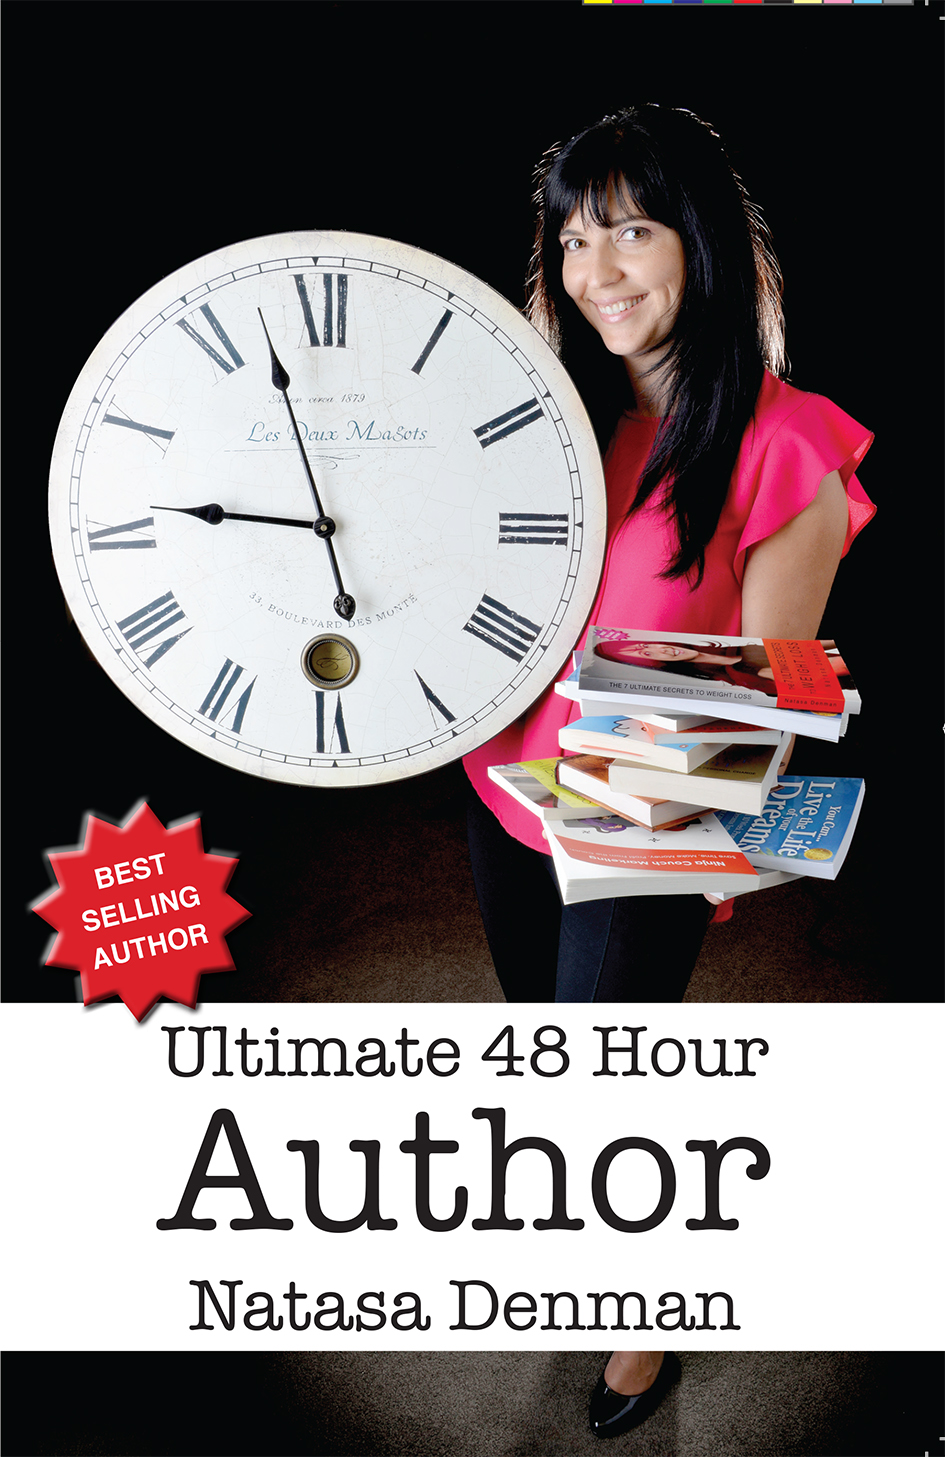 Ultimate 48 Hour Author